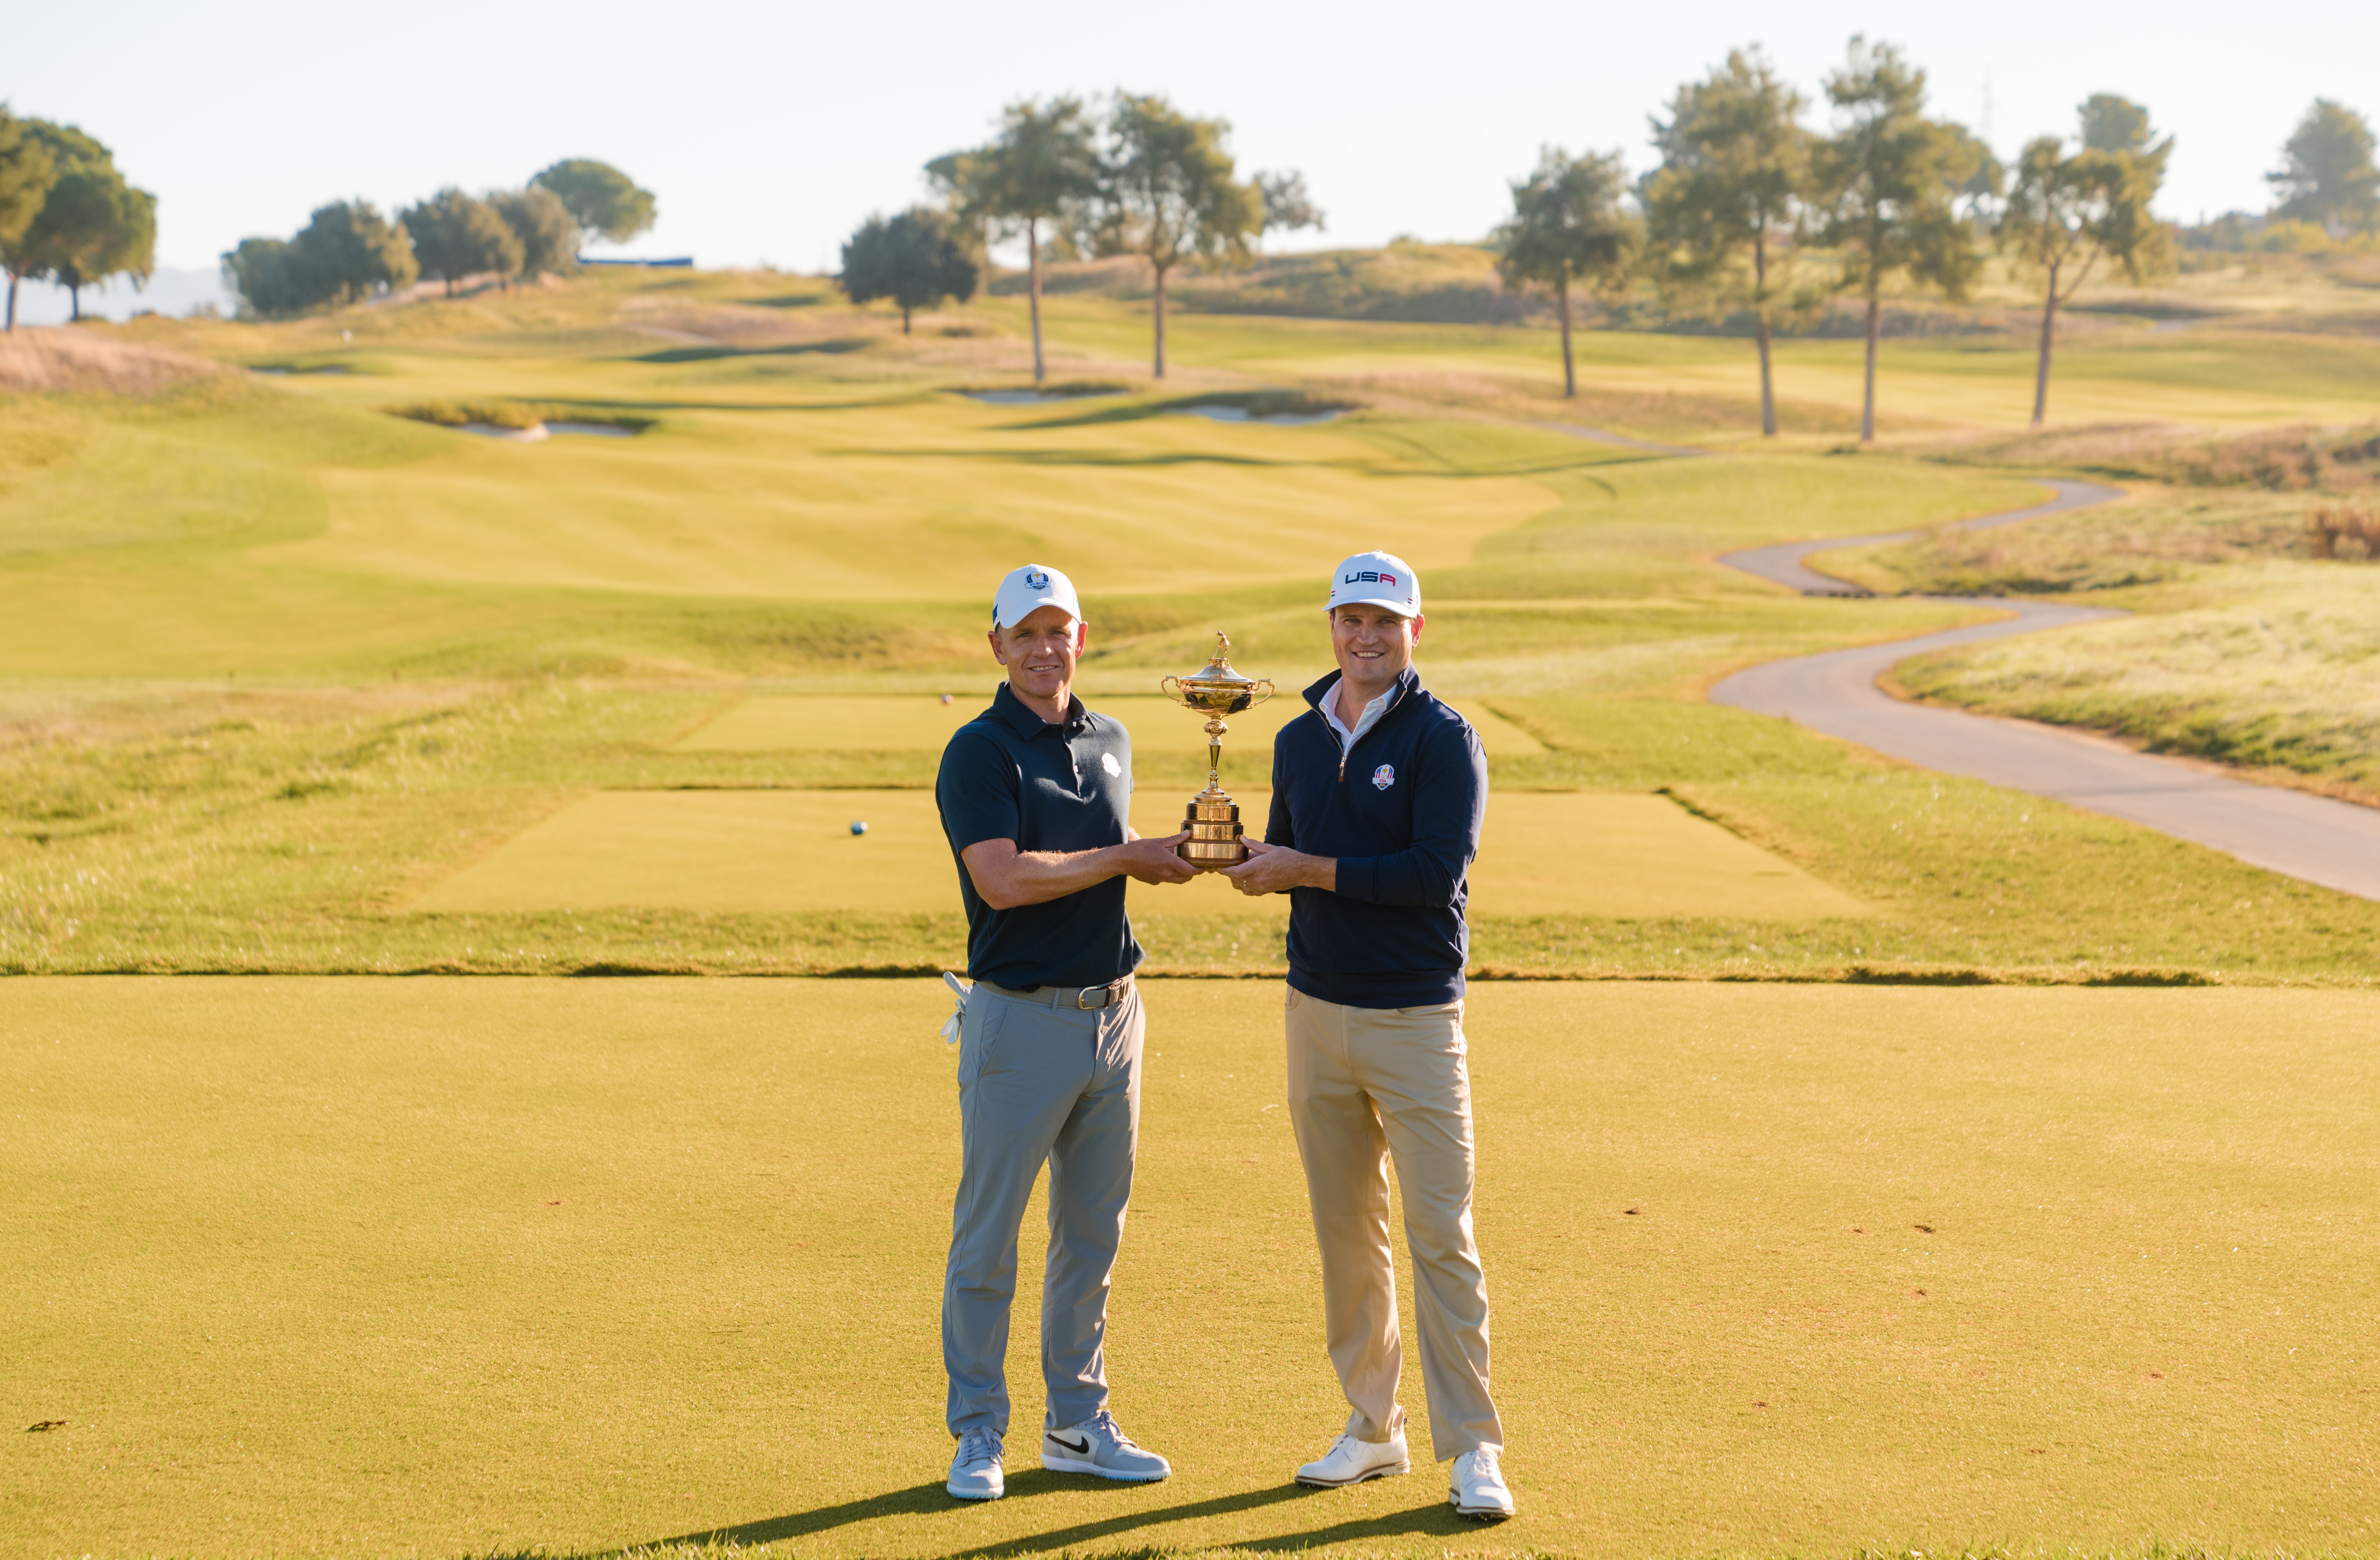 European Captain Luke Donald and U.S. Captain Zach Johnson will lead their teams this fall in Rome.